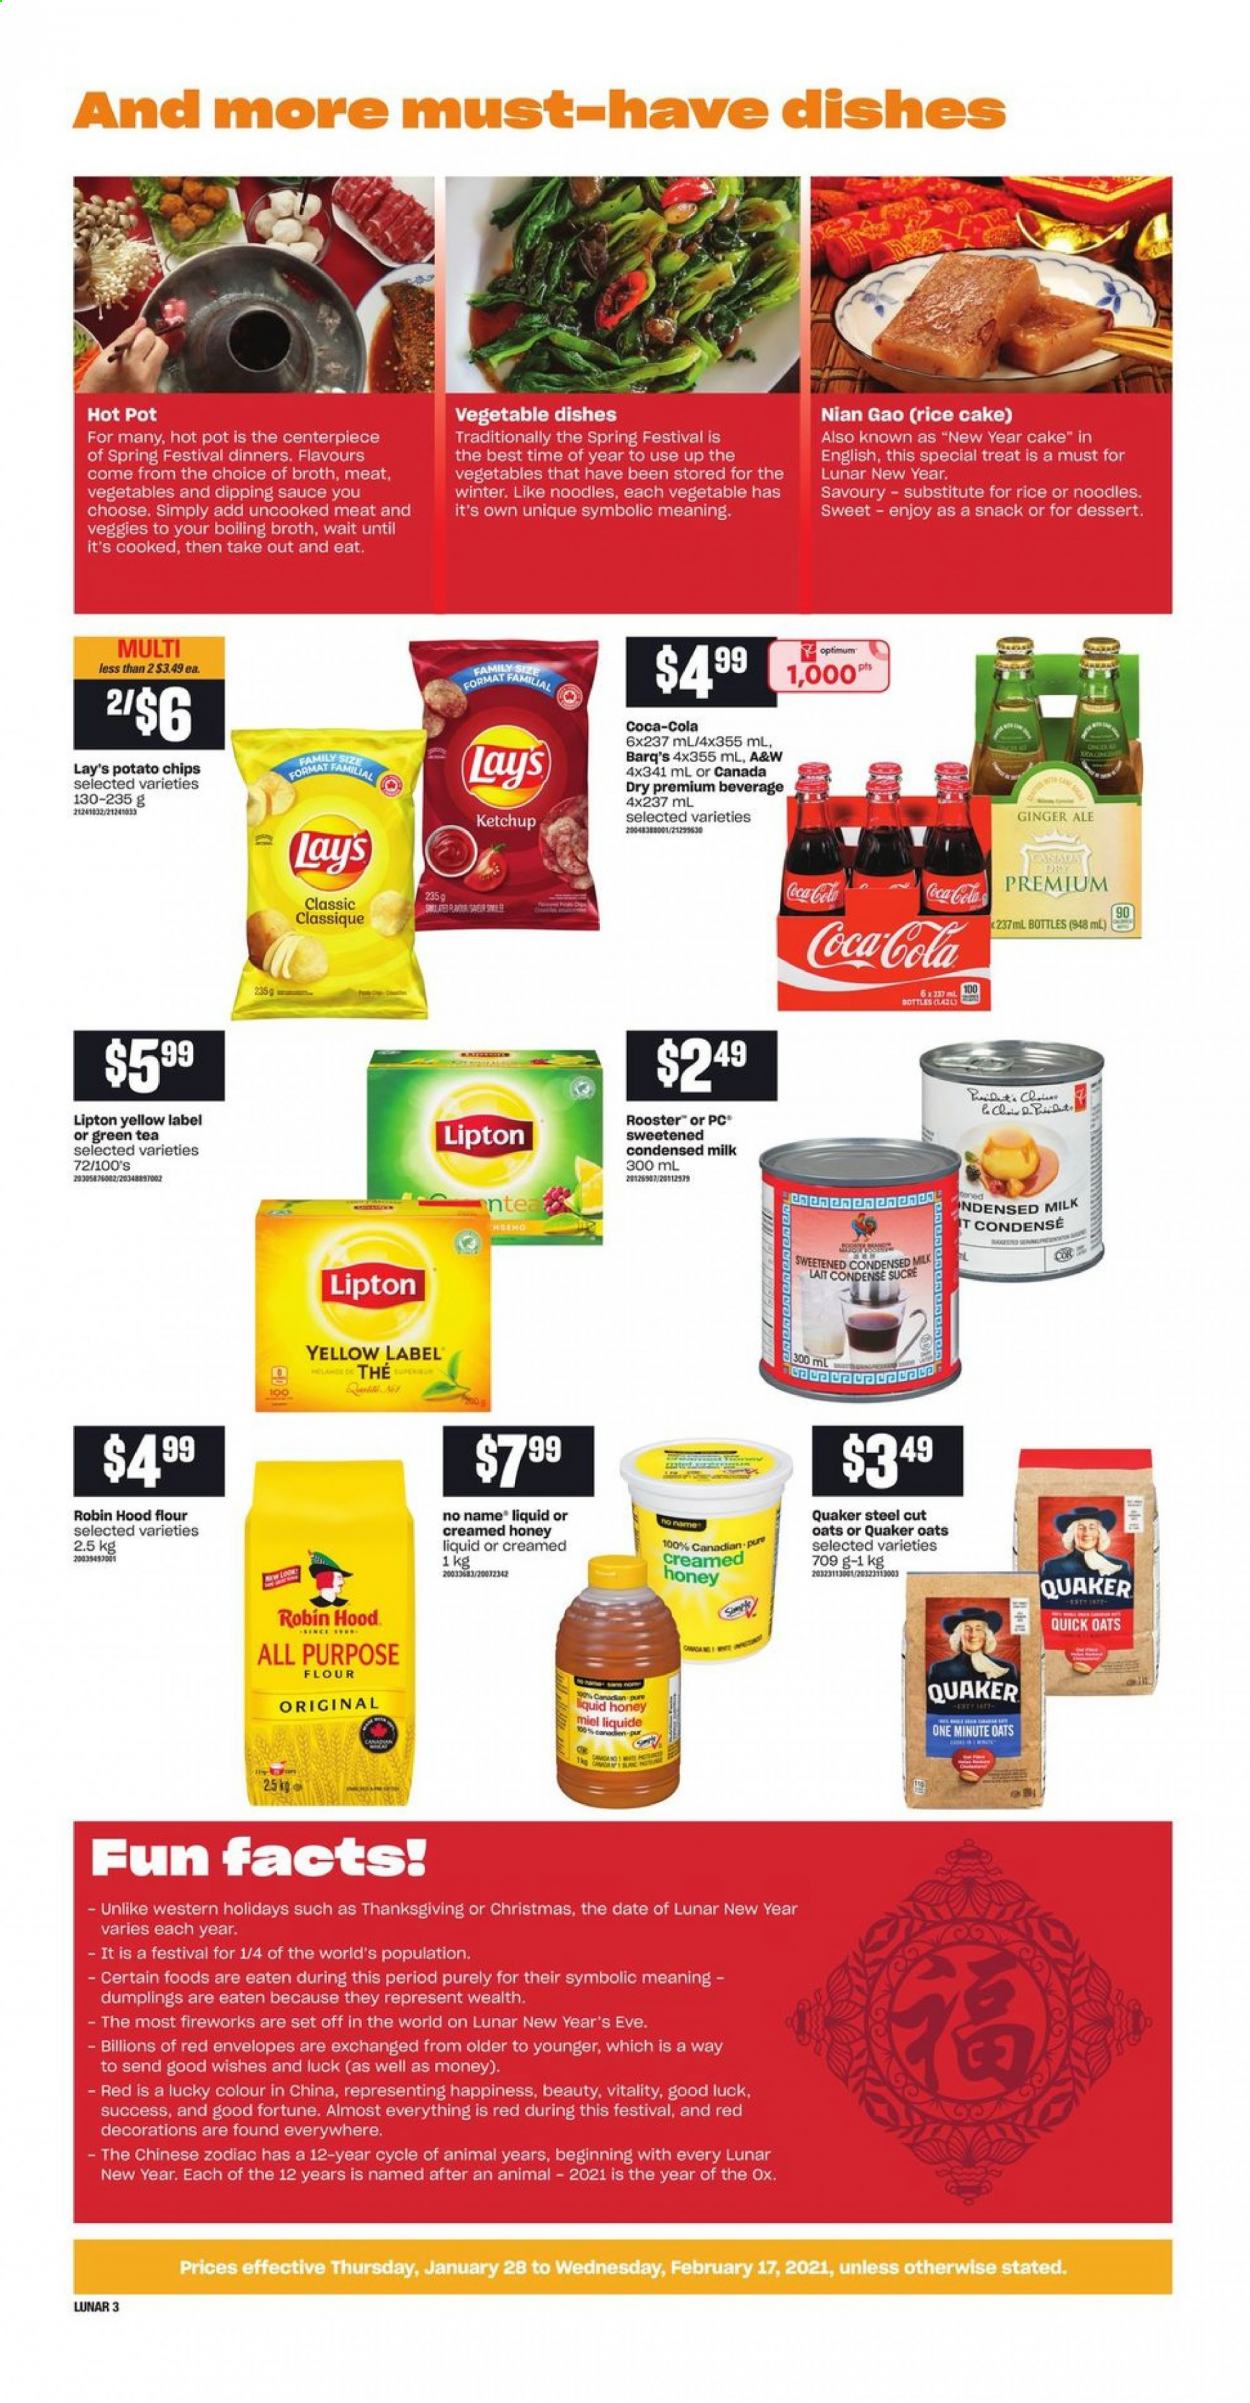 thumbnail - Atlantic Superstore Flyer - January 28, 2021 - February 17, 2021 - Sales products - No Name, sauce, dumplings, Quaker, noodles, milk, condensed milk, snack, potato chips, Lay’s, all purpose flour, flour, oats, broth, Quick Oats, honey, Canada Dry, Coca-Cola, ginger ale, A&W, green tea, Optimum, pot, chips. Page 3.